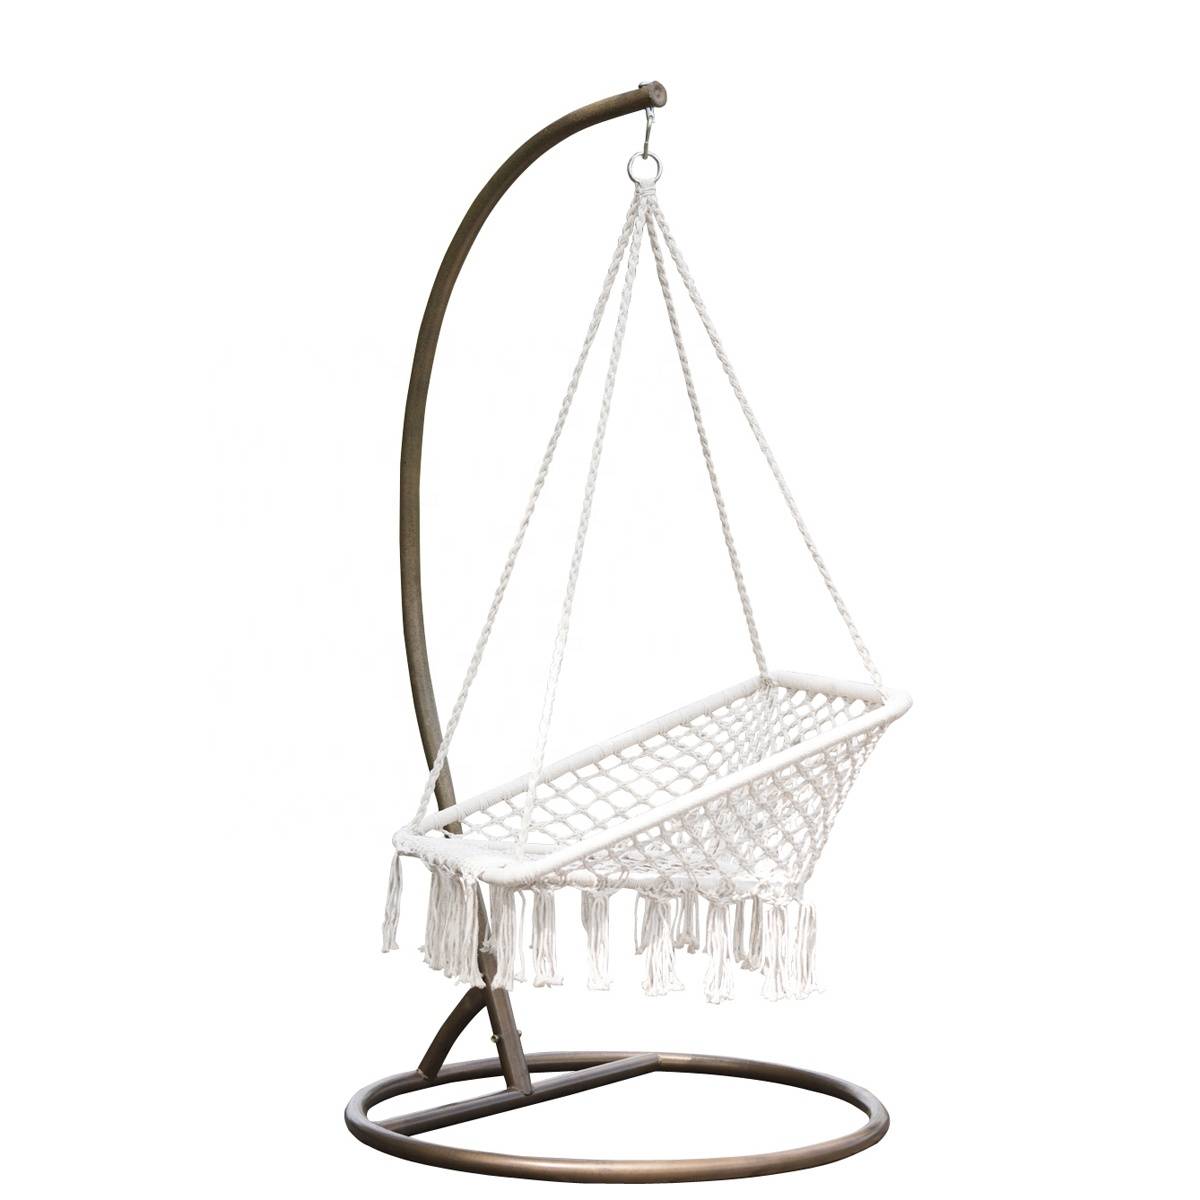 Hanging Square  Hammock Swing Chair, Outdoor Garden Rope Swing Chair